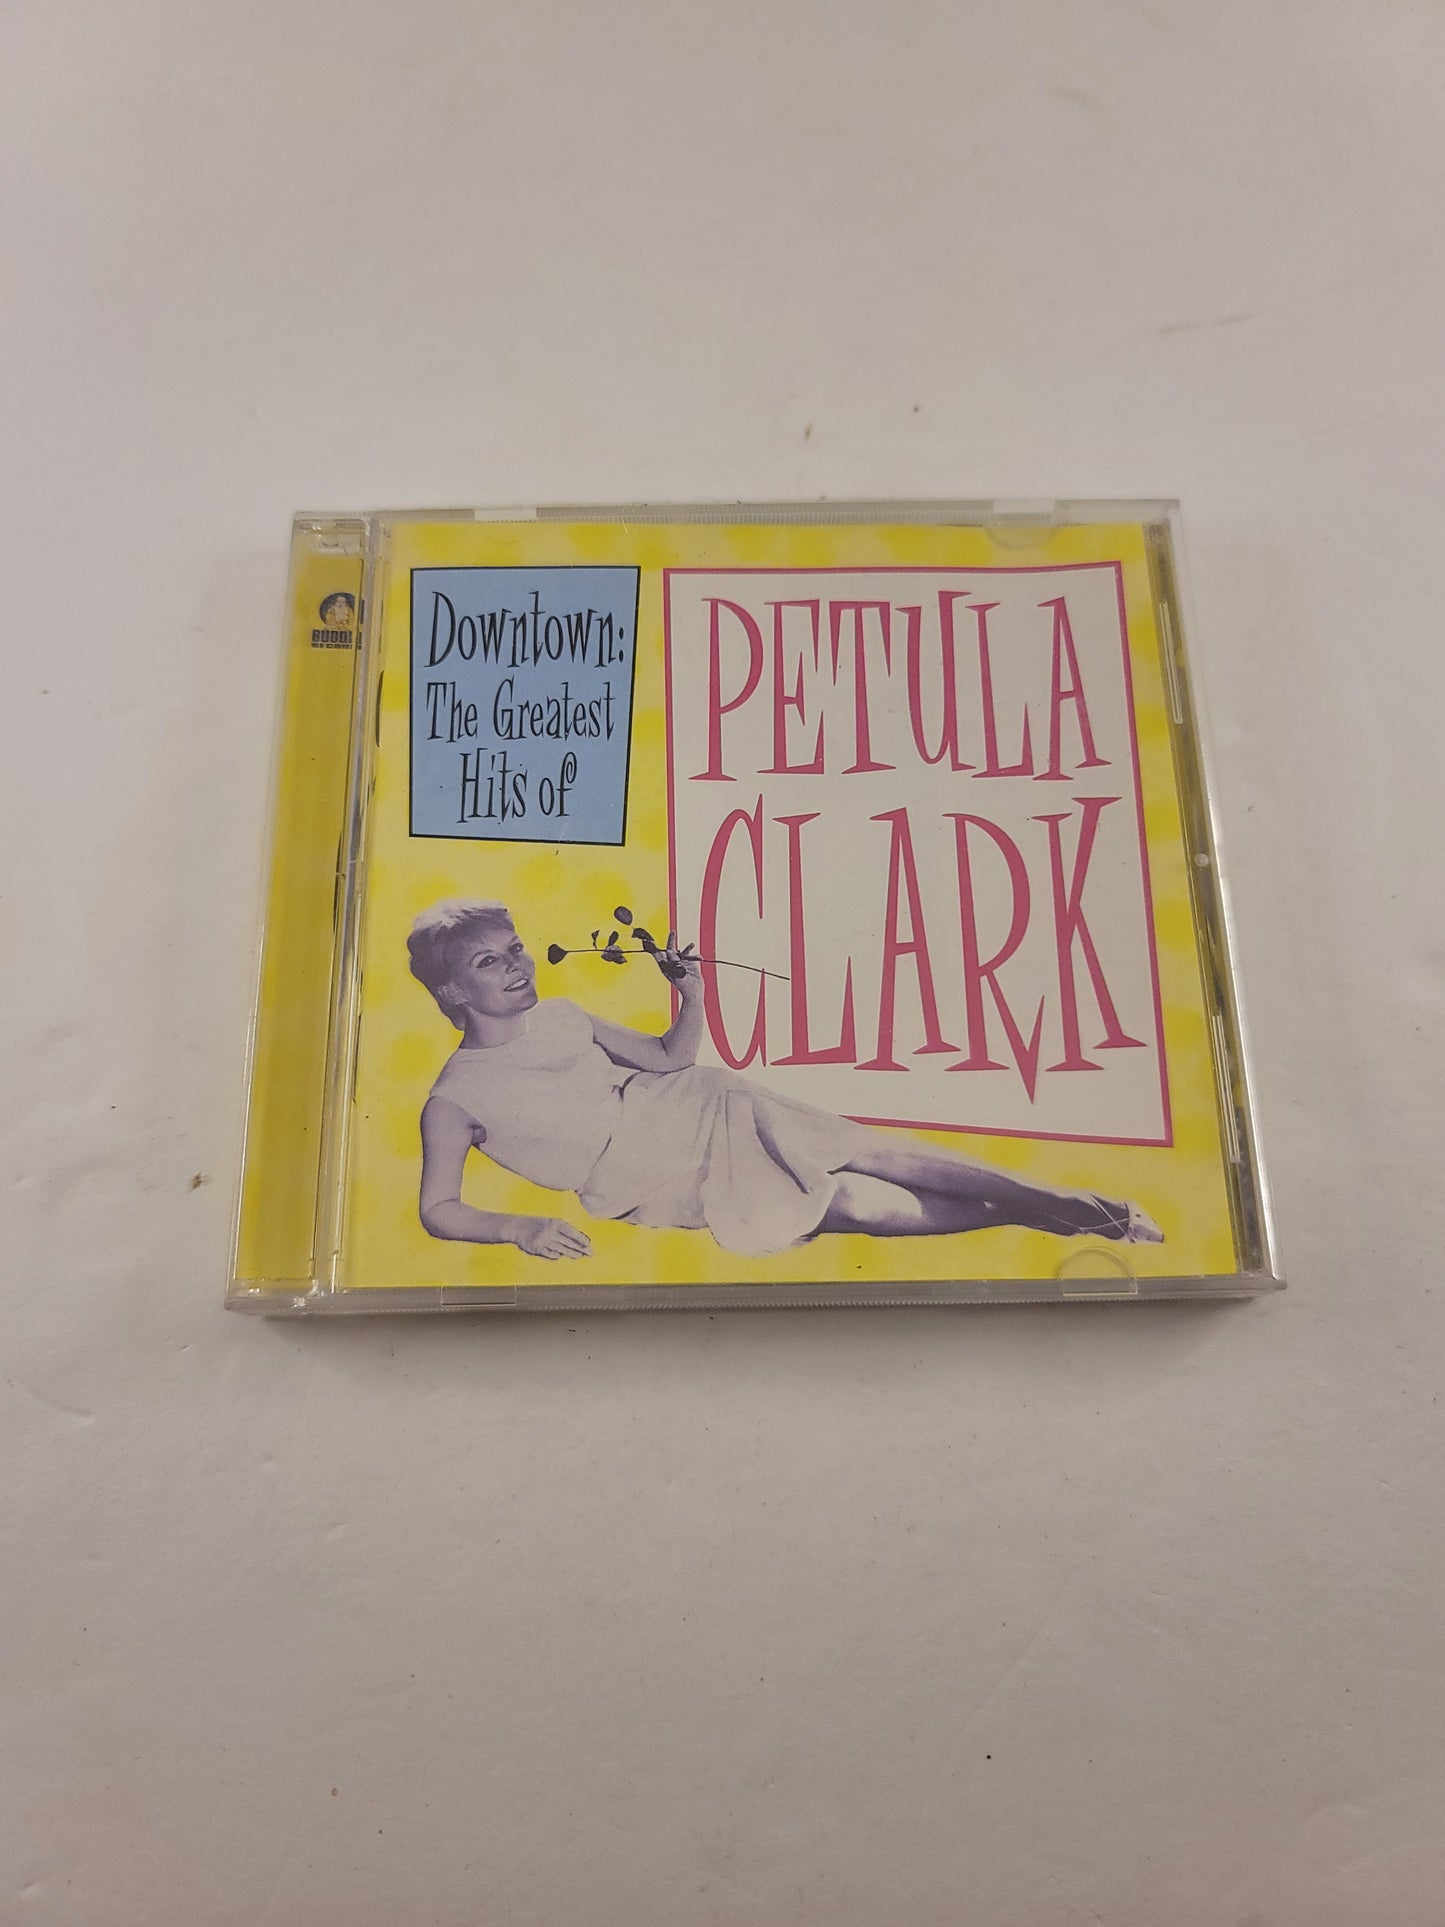 Downtown: The Greatest Hits of Petula Clark by Petula Clark CD